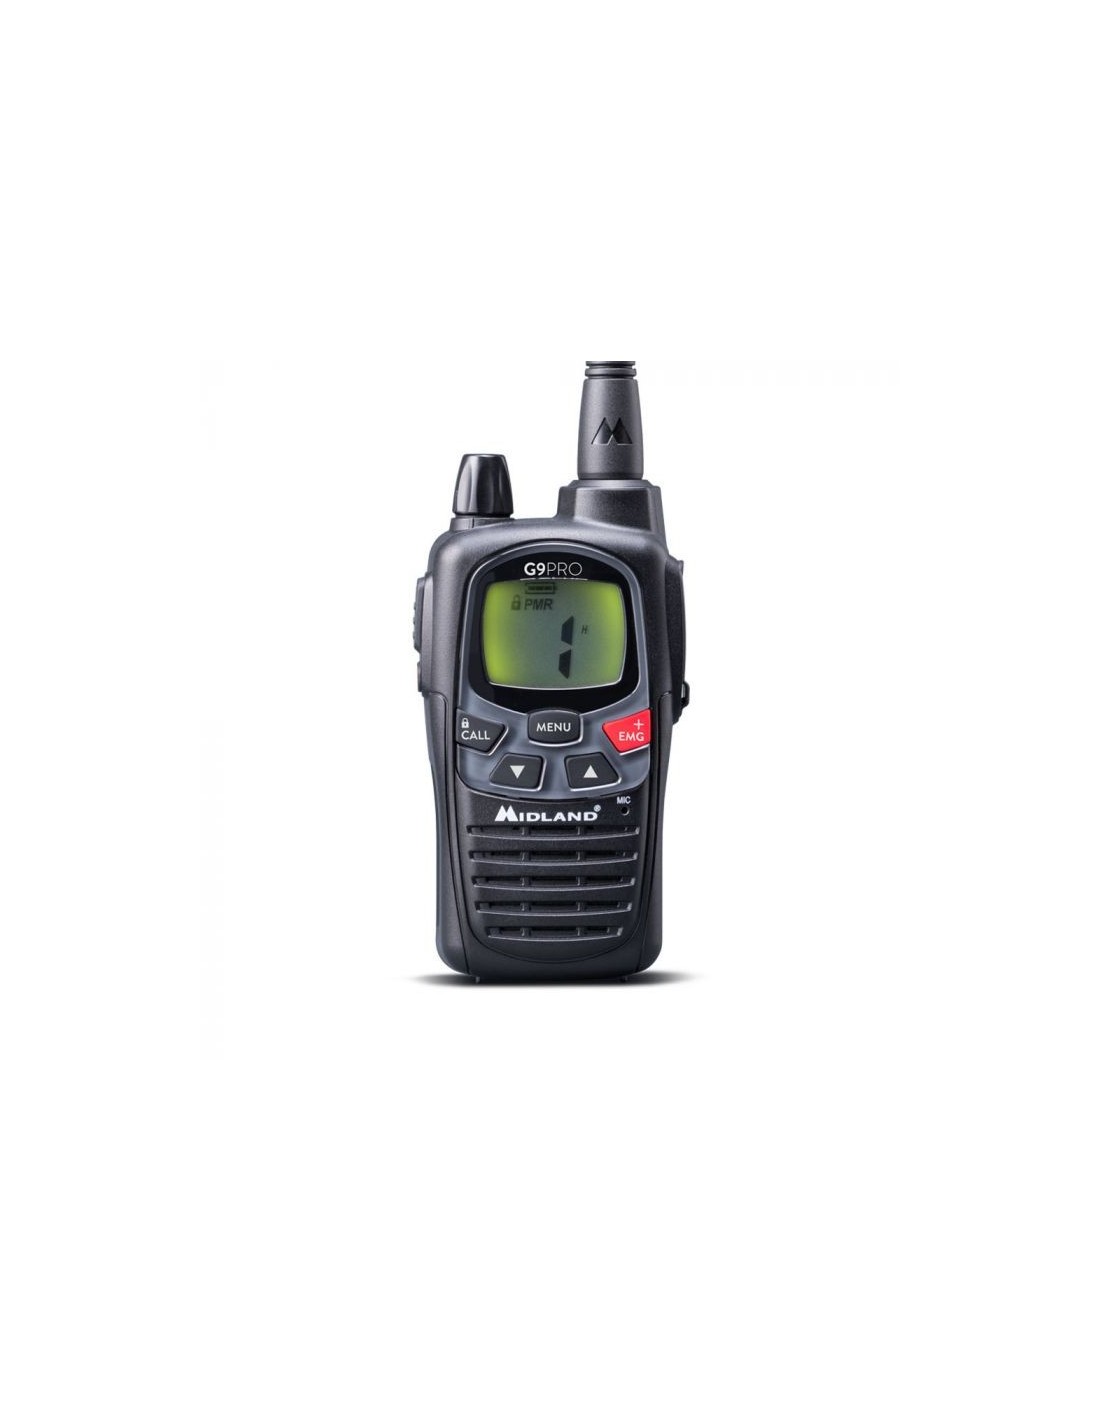 Midland G9 plus MODIFICATION and review: PMR446 